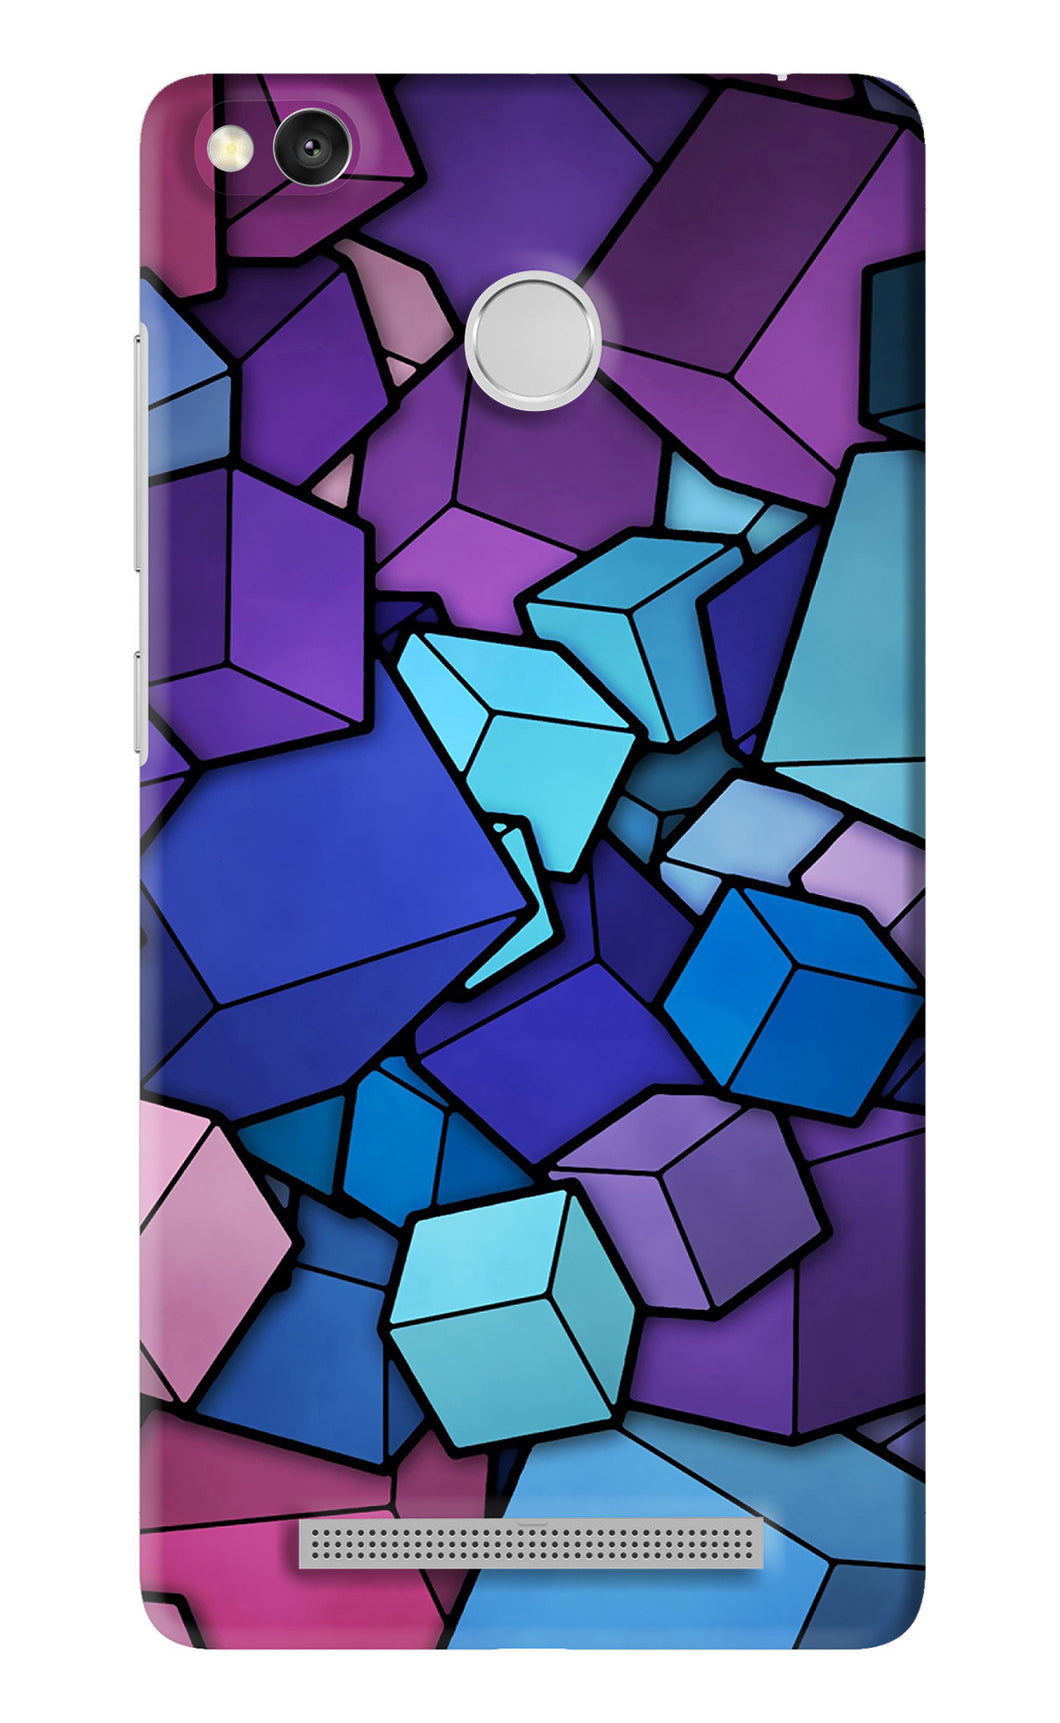 Cubic Abstract Xiaomi Redmi 3S Prime Back Skin Wrap